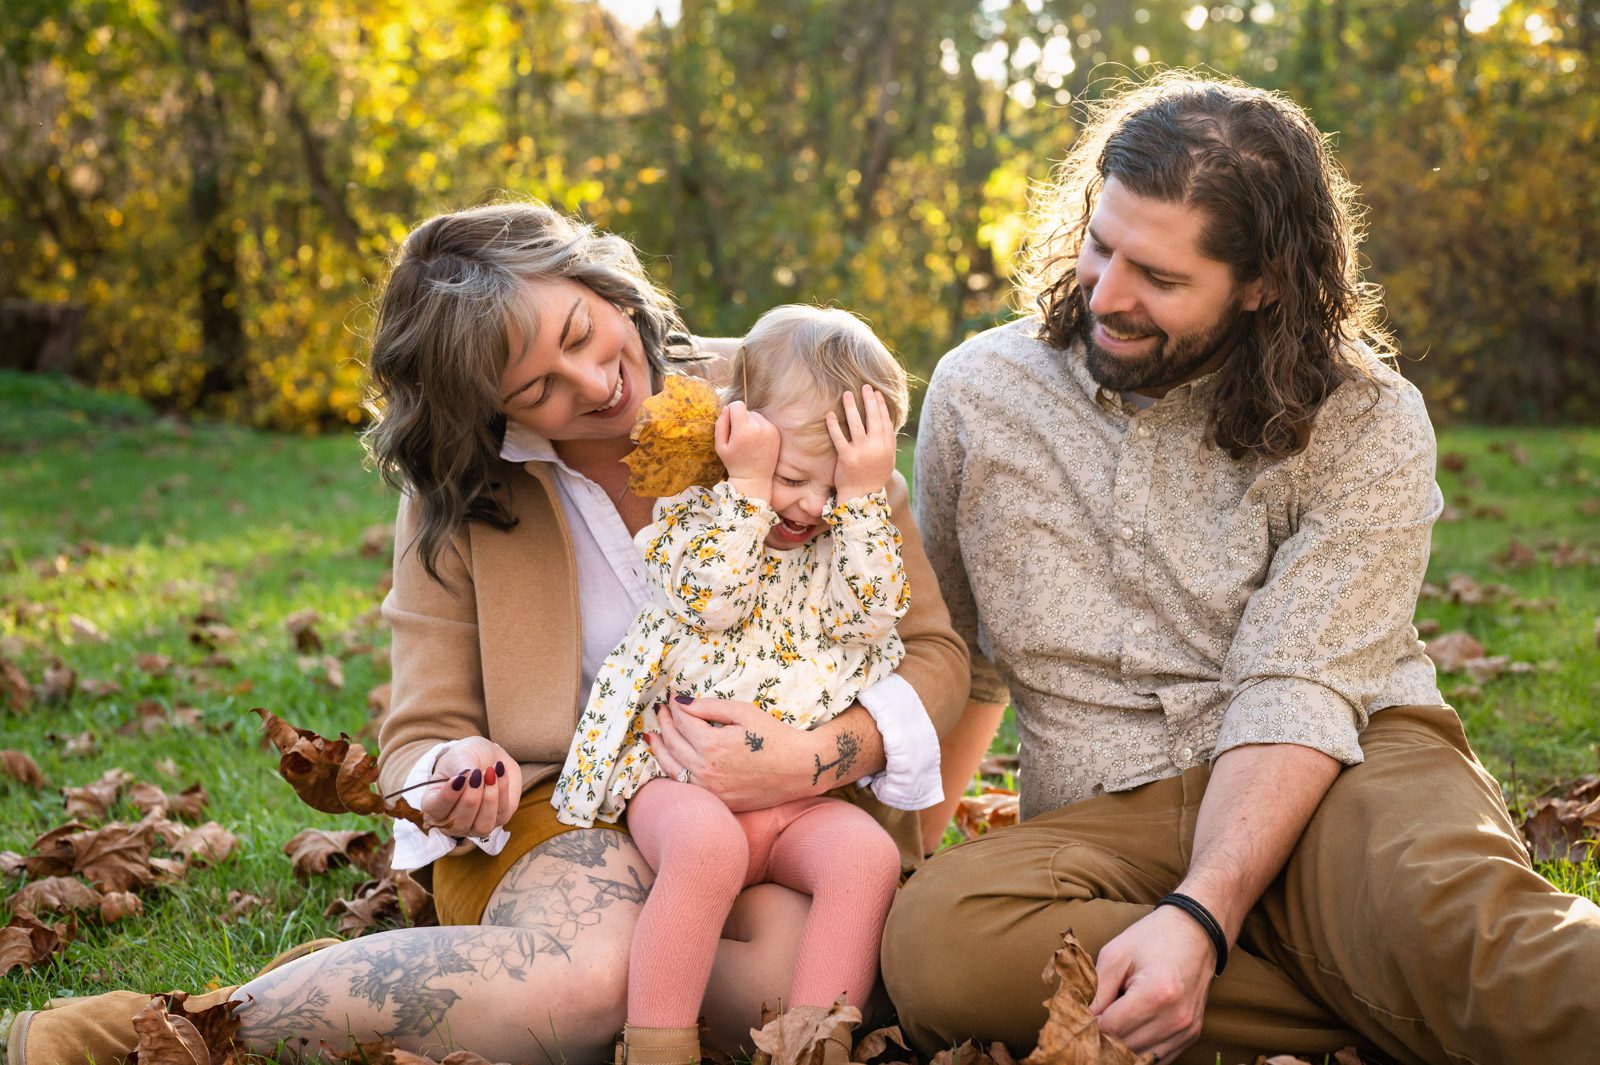 A young girl sitting on her parents lap and laughing as they smile down at her during a family photoshoot